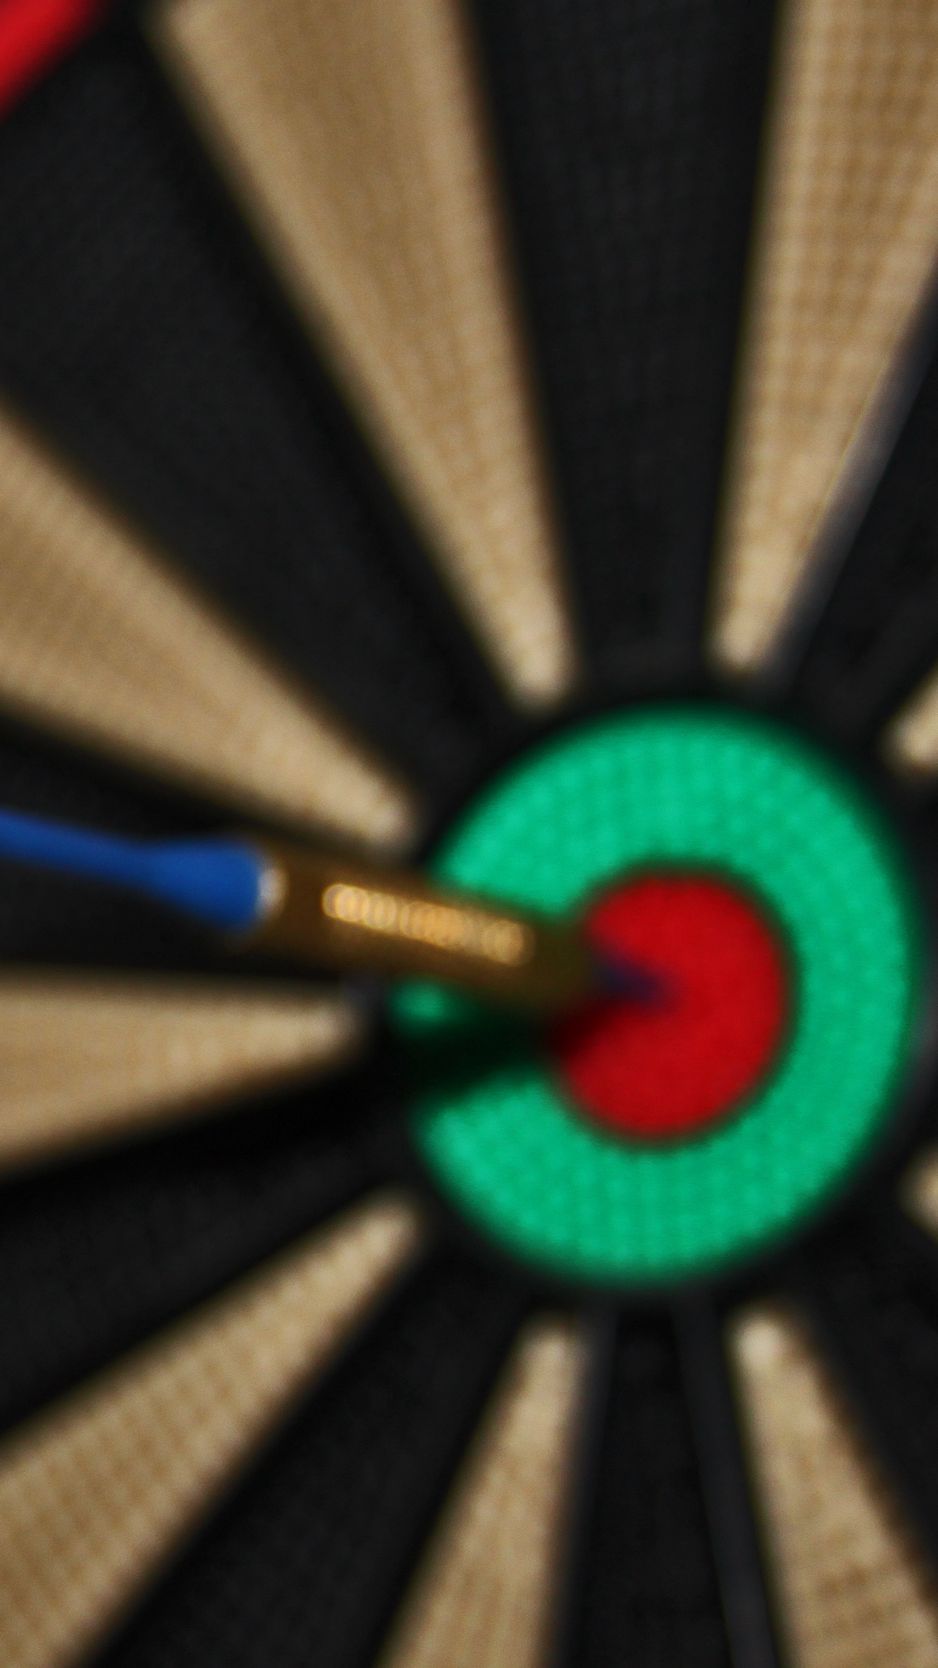 Download Wallpaper 938x1668 Darts Javelin Target Iphone 8 7 6s 6 For Parallax Hd Background